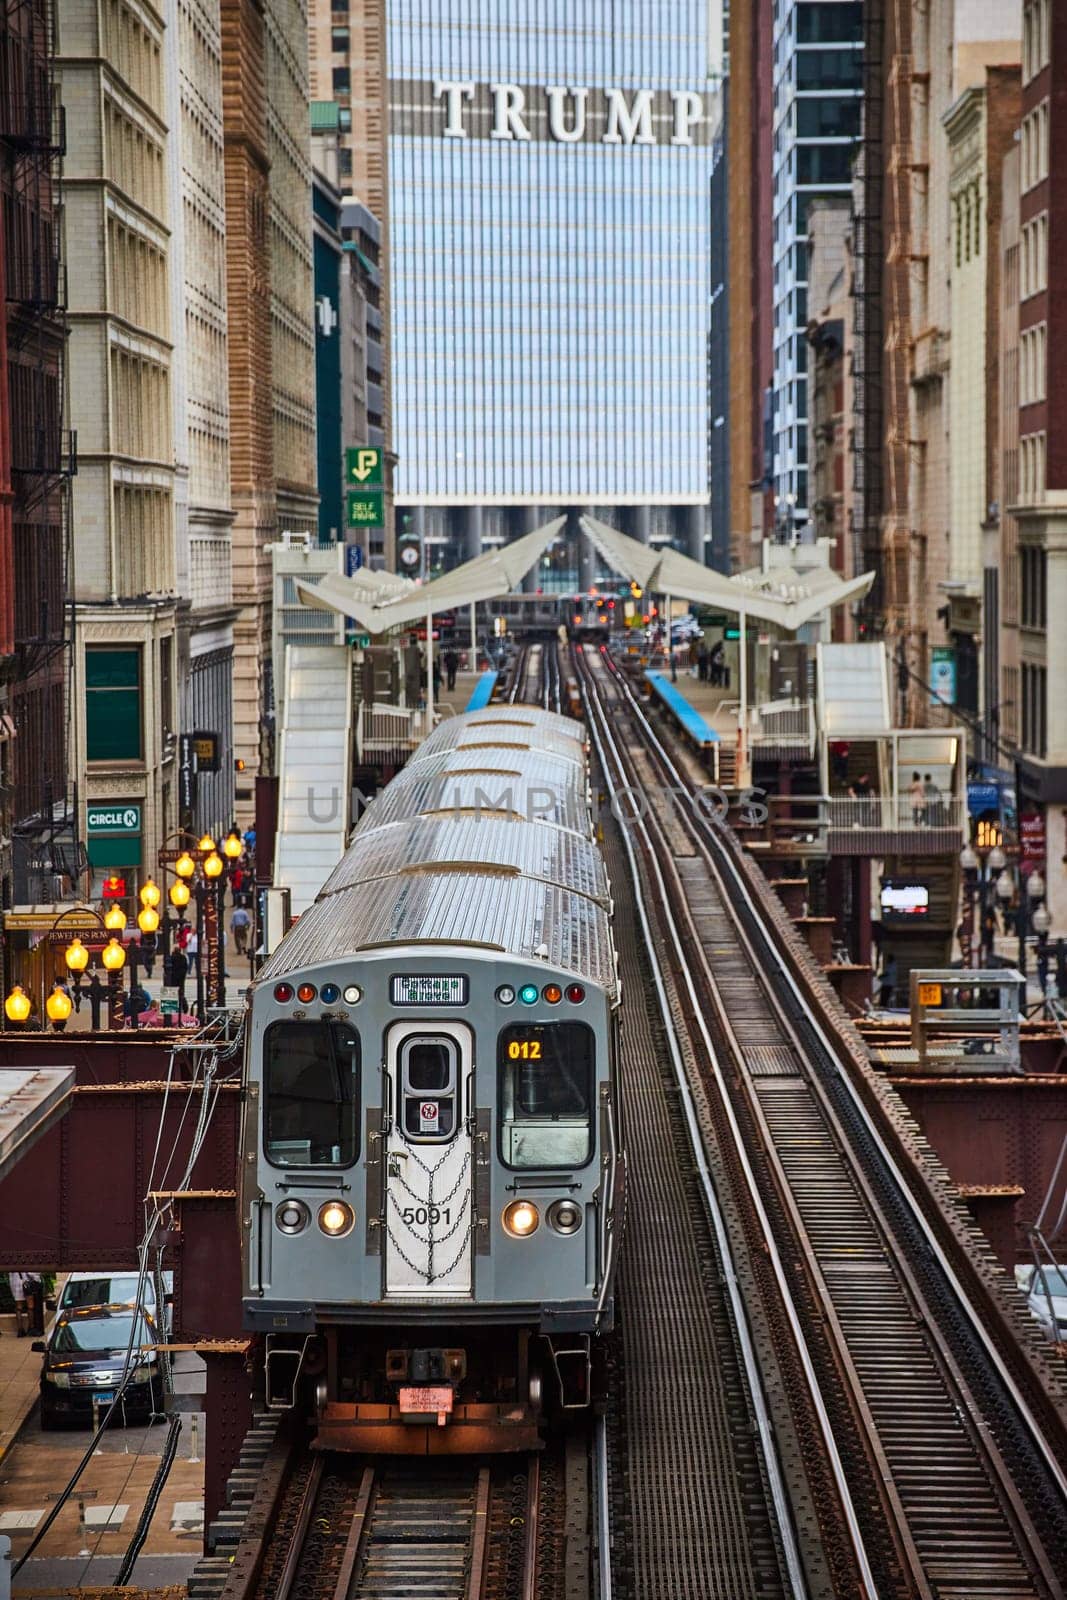 Silver Elevated Train in Historical Downtown Chicago by njproductions